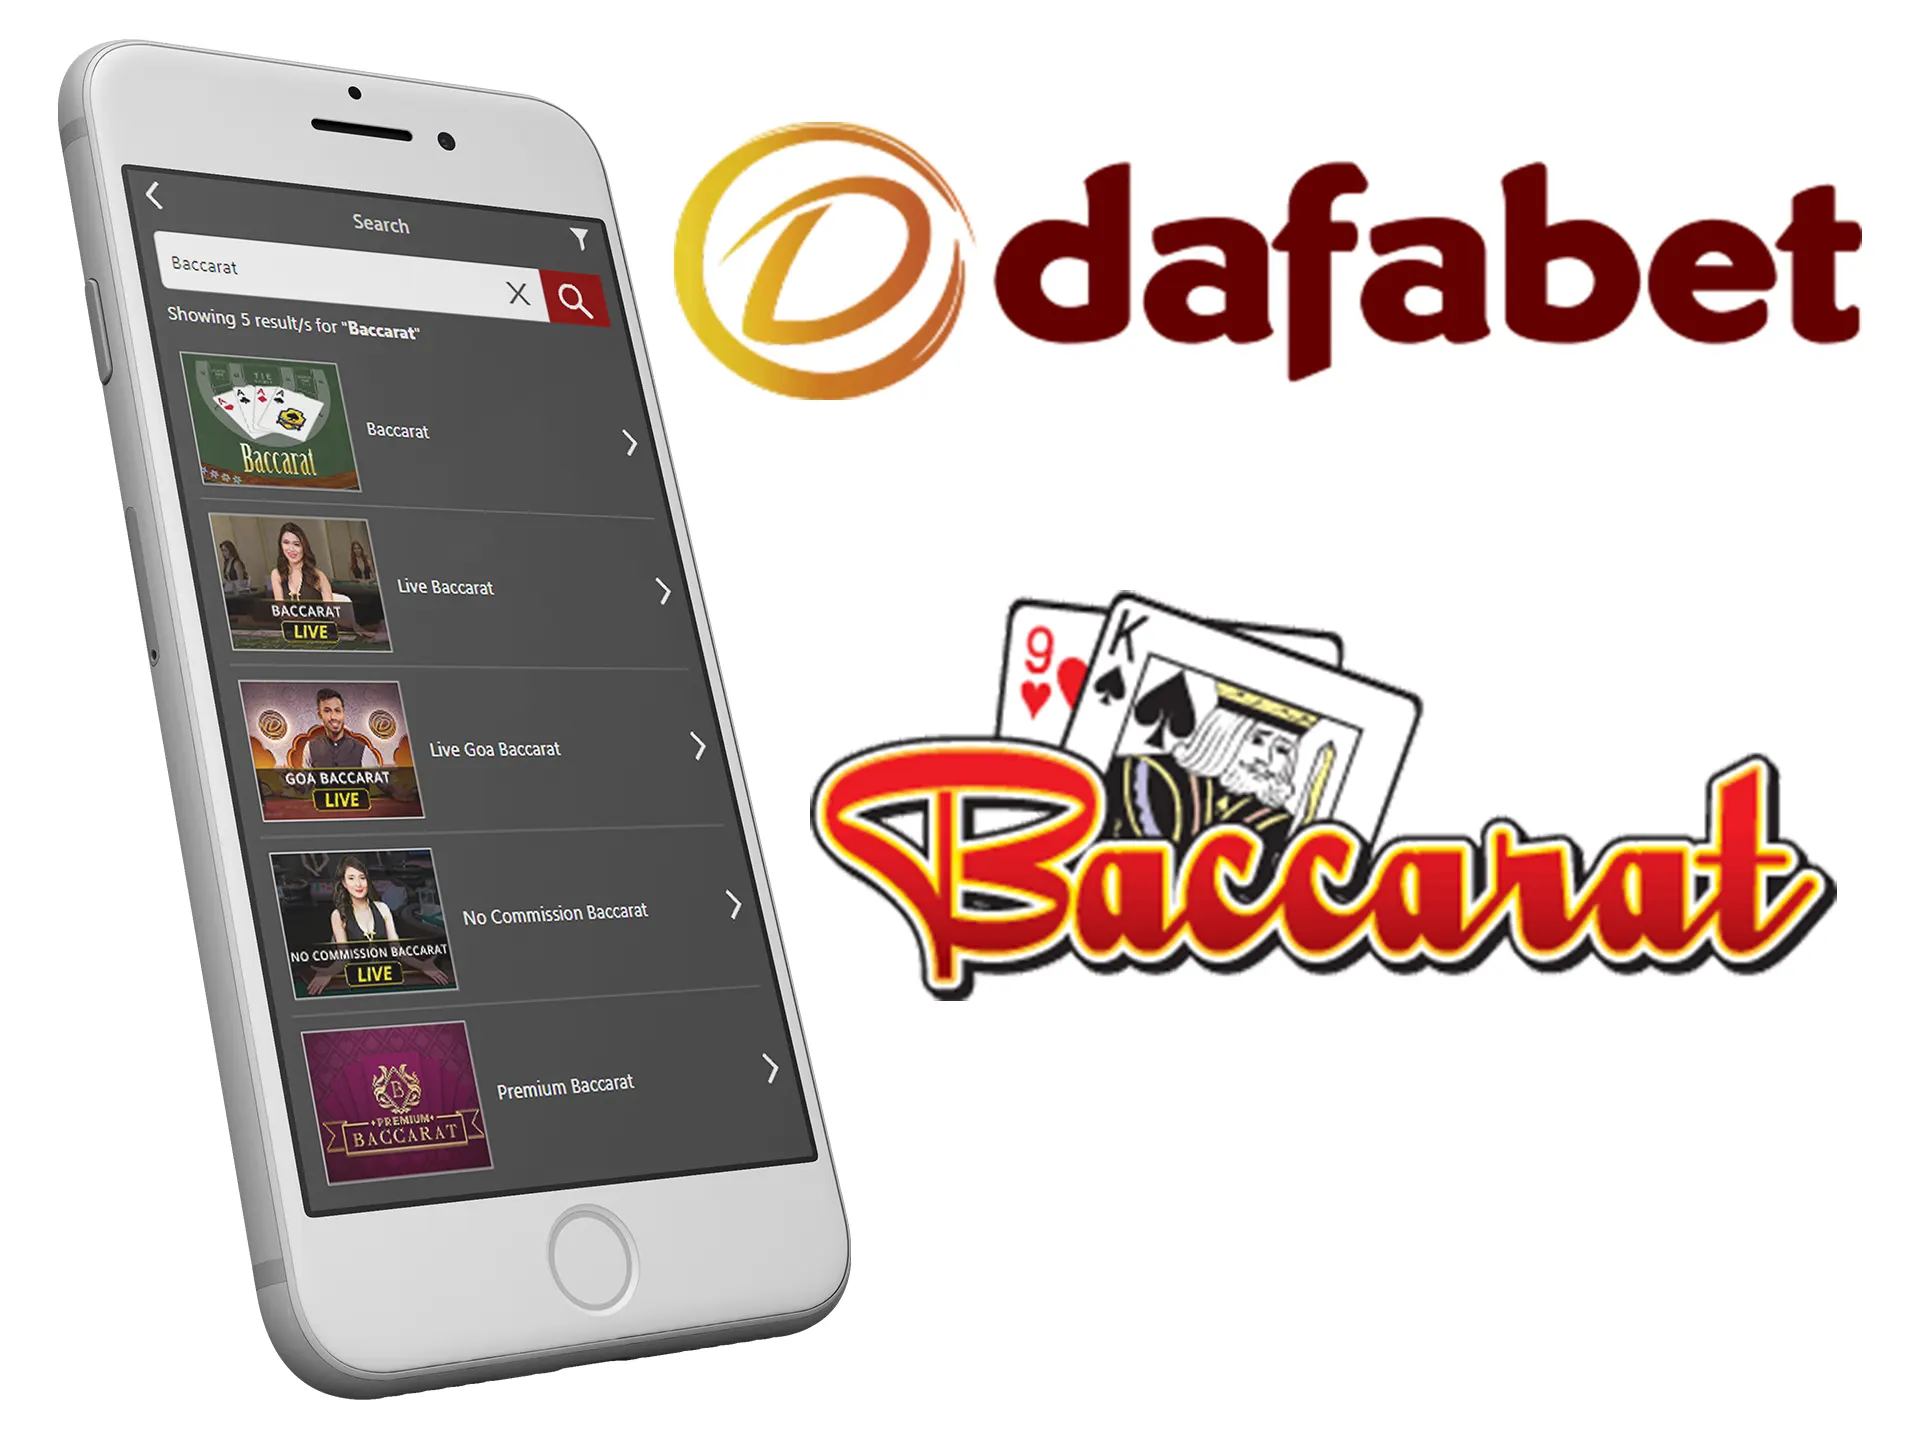 Play Dafabet baccarat games at live tables.